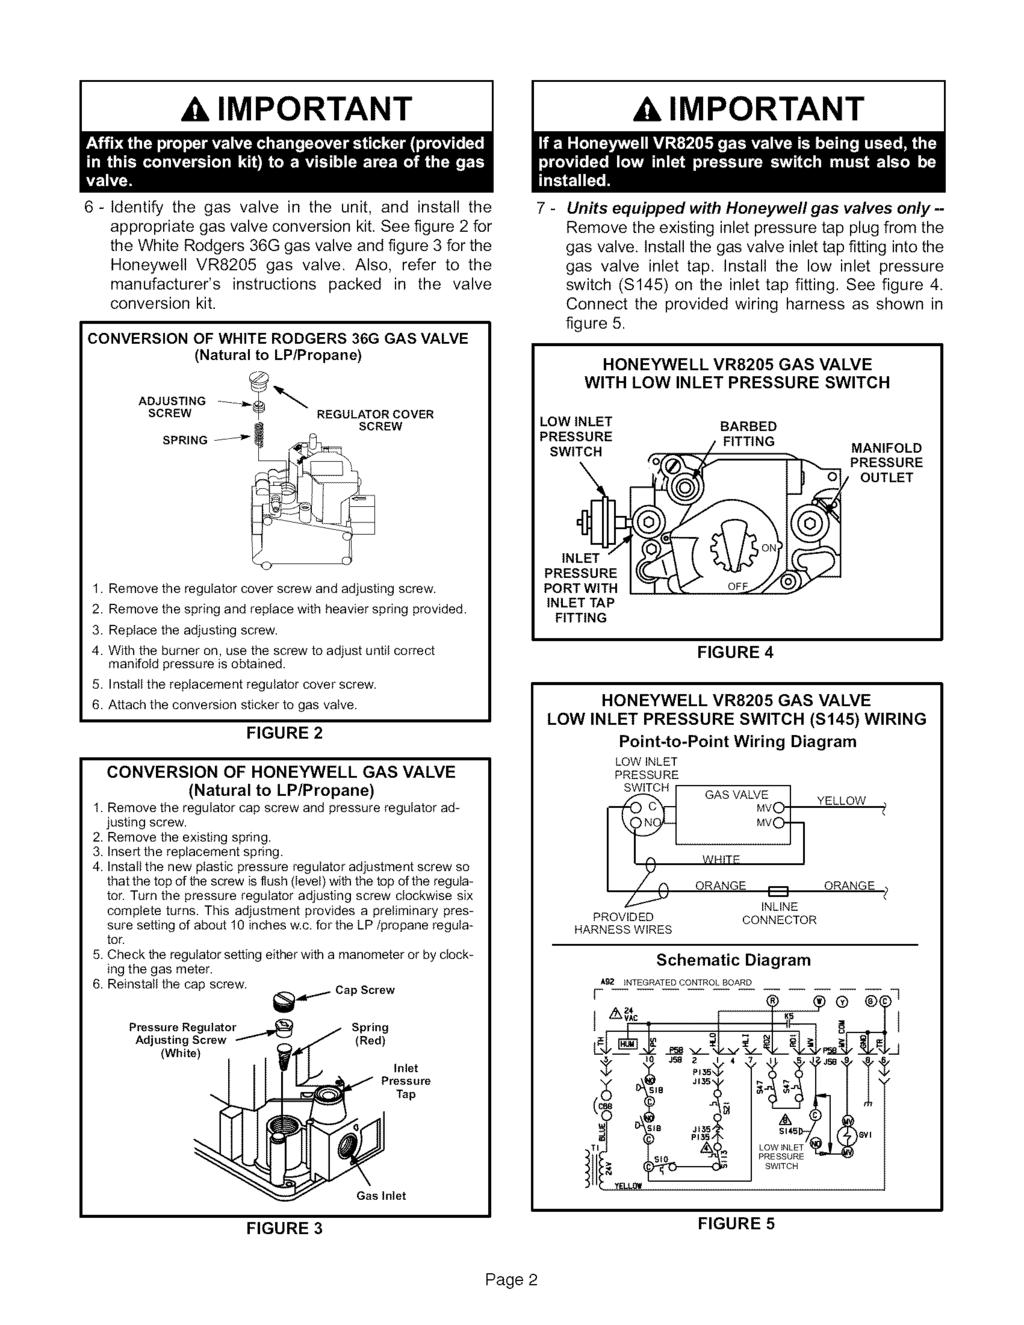 IMPORTANT A IMPORTANT 6 - Identify the gas valve in the unit, and install the appropriate gas valve conversion kit.